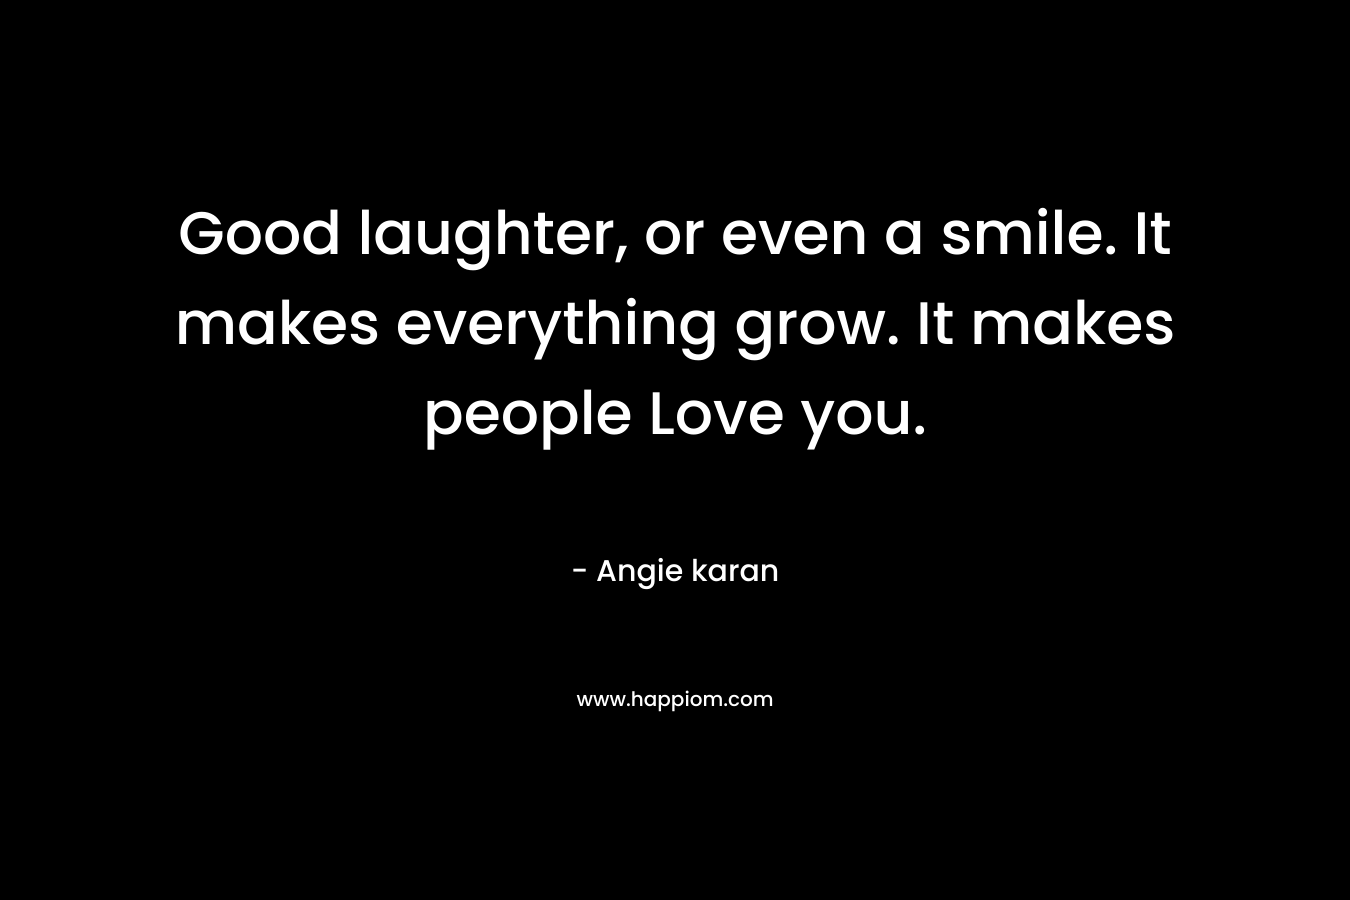 Good laughter, or even a smile. It makes everything grow. It makes people Love you.